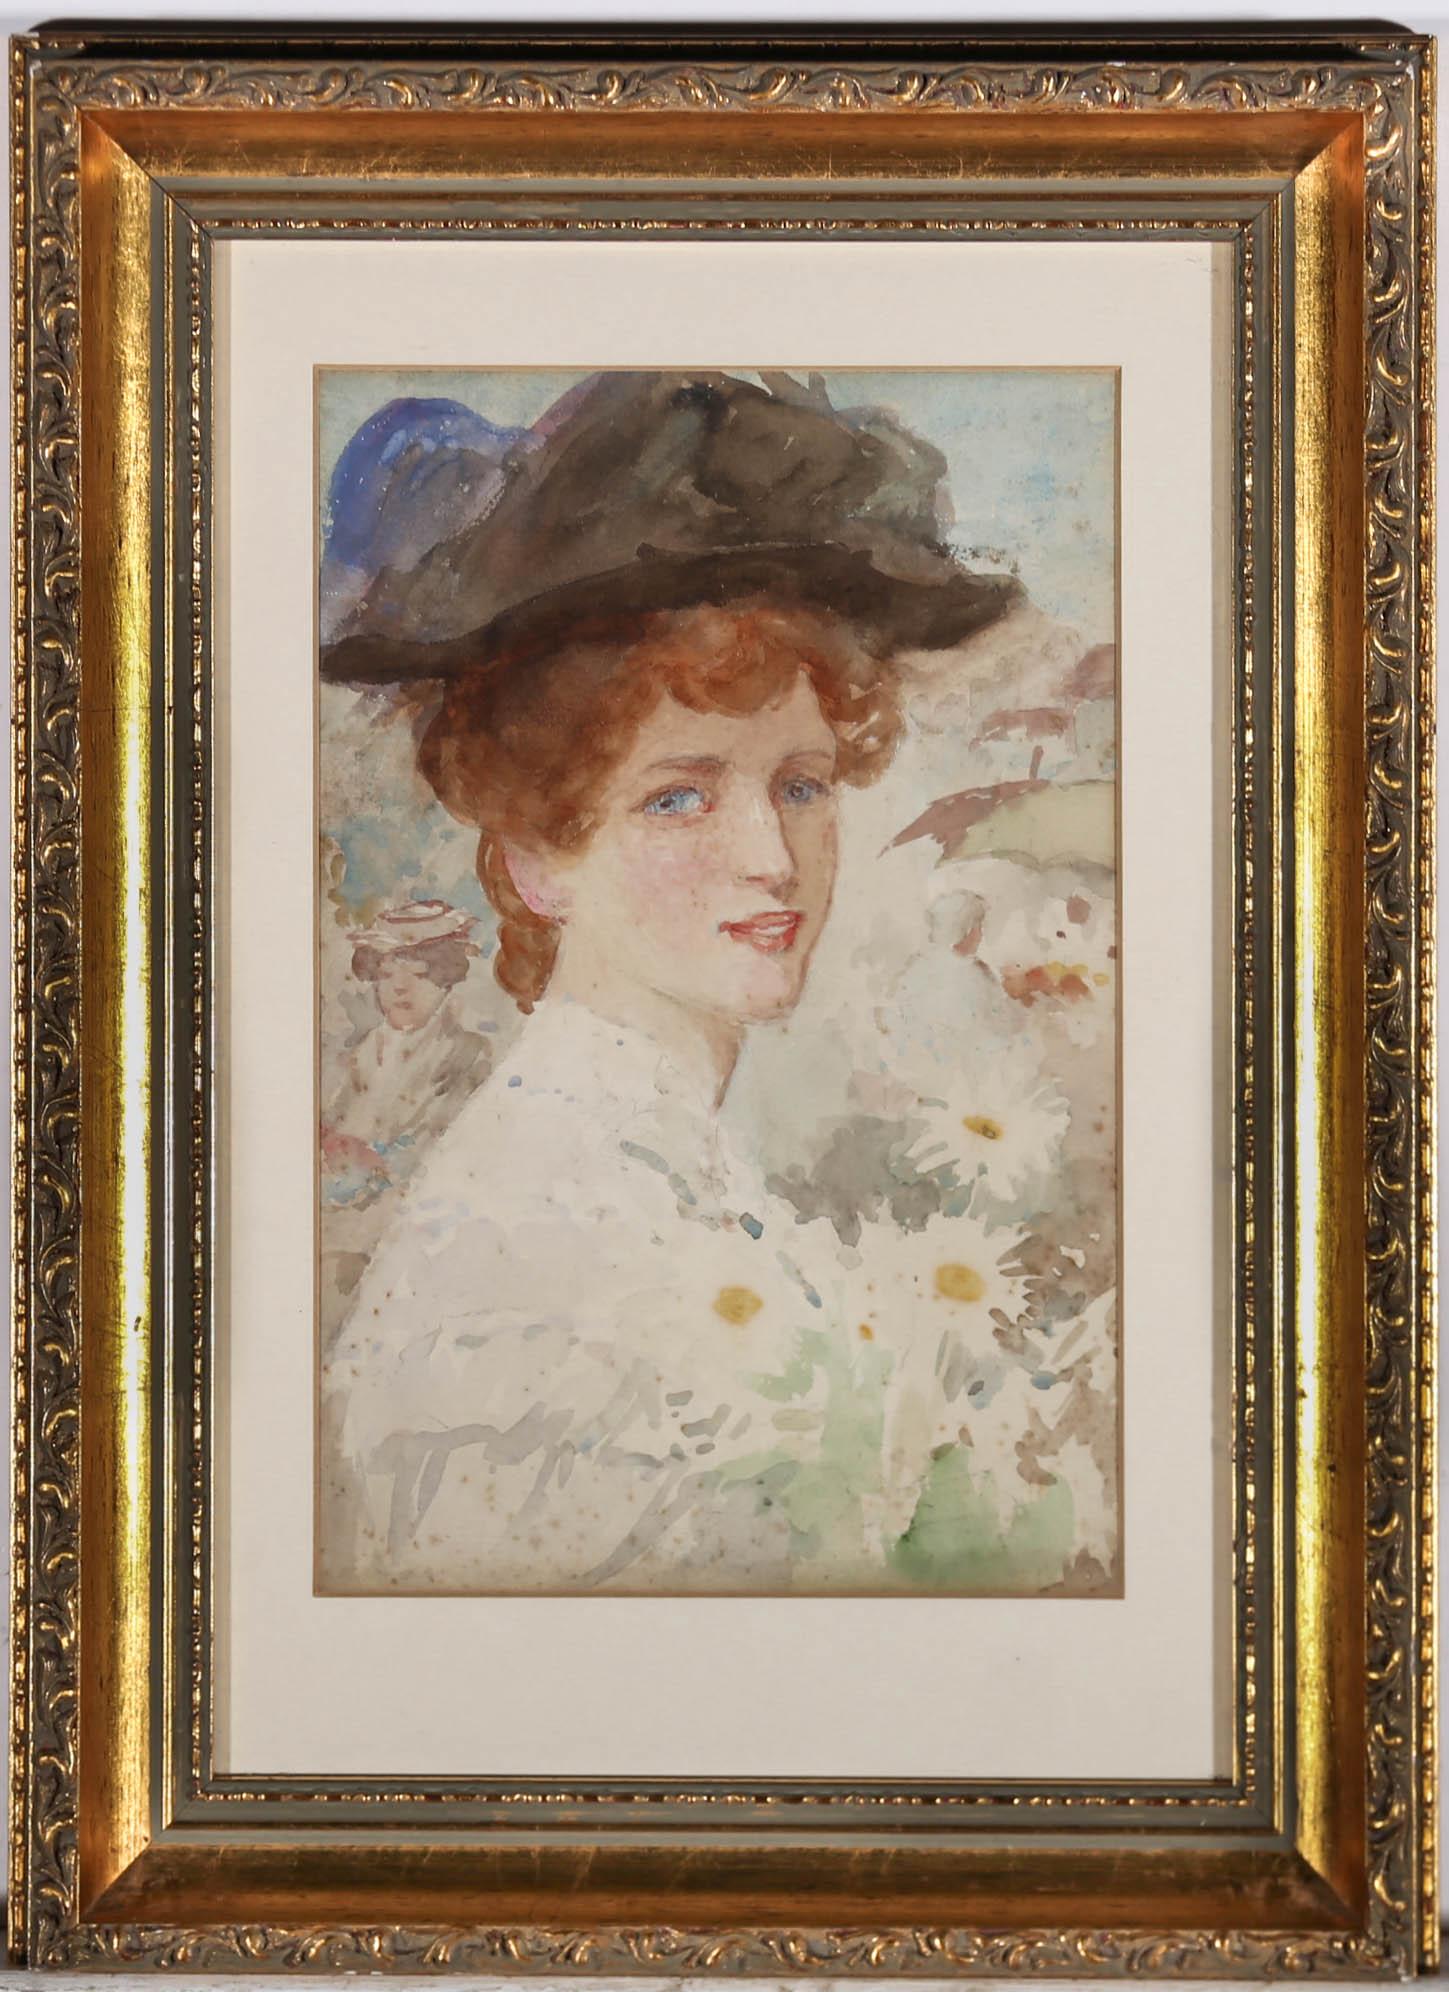 A charming Edwardian portrait of a smiling woman with a black hat and a bunch of daisies. The painting is unsigned, with an inscription at the reverse of the paper. One inscription is in the artist's hand reading "Flower Market." The other